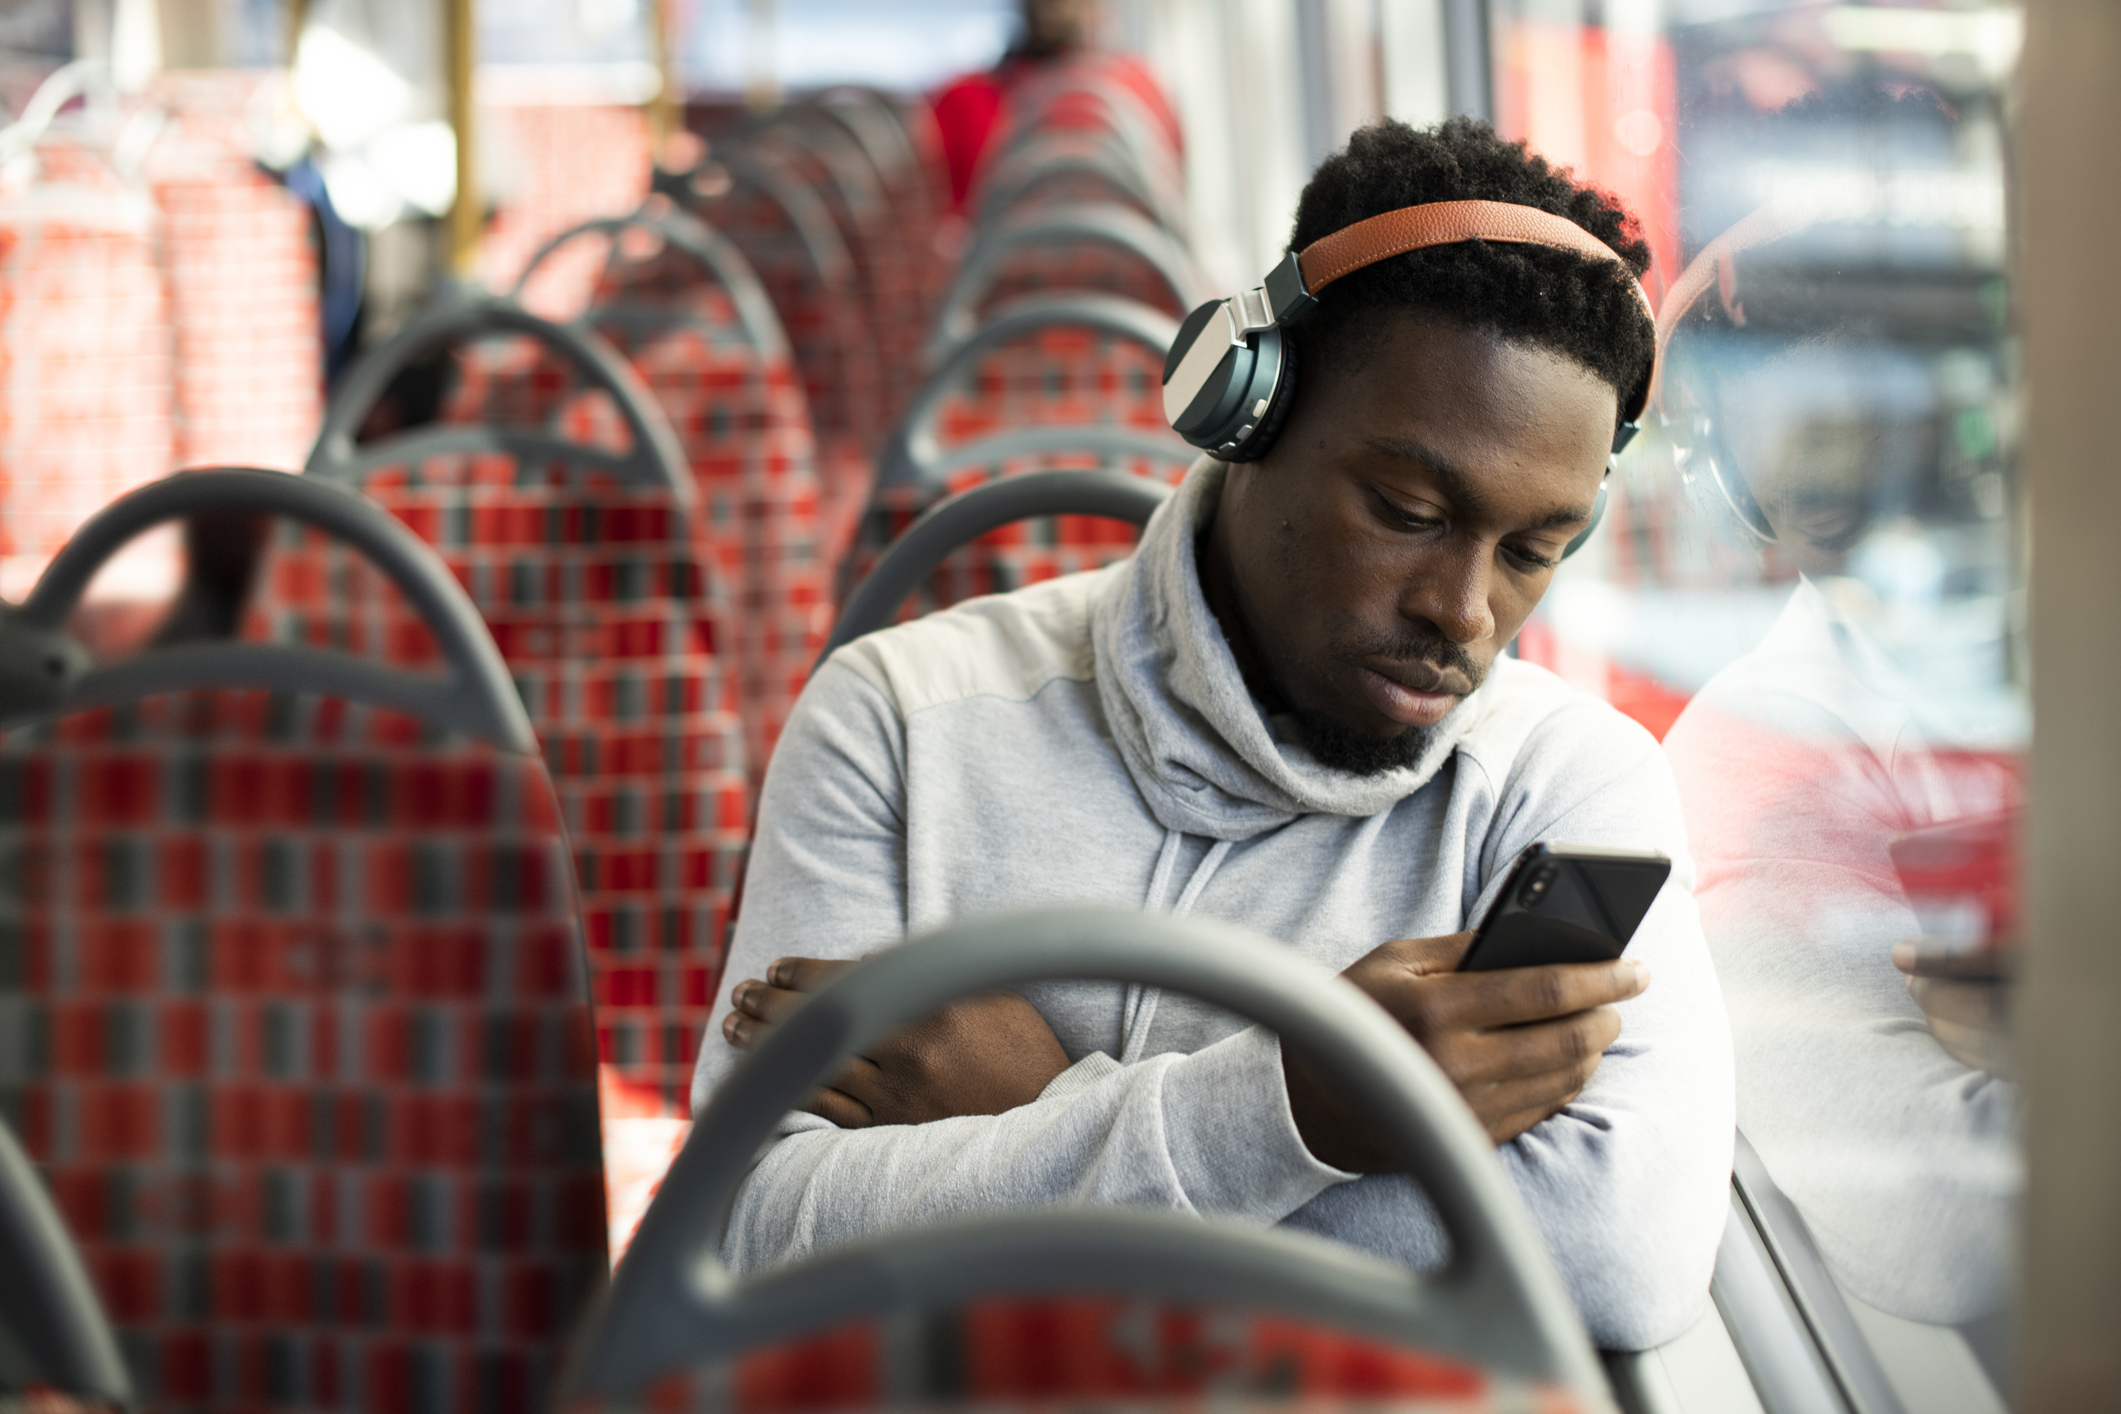 A person wearing headphones on a sitting on a bus using their mobile phone